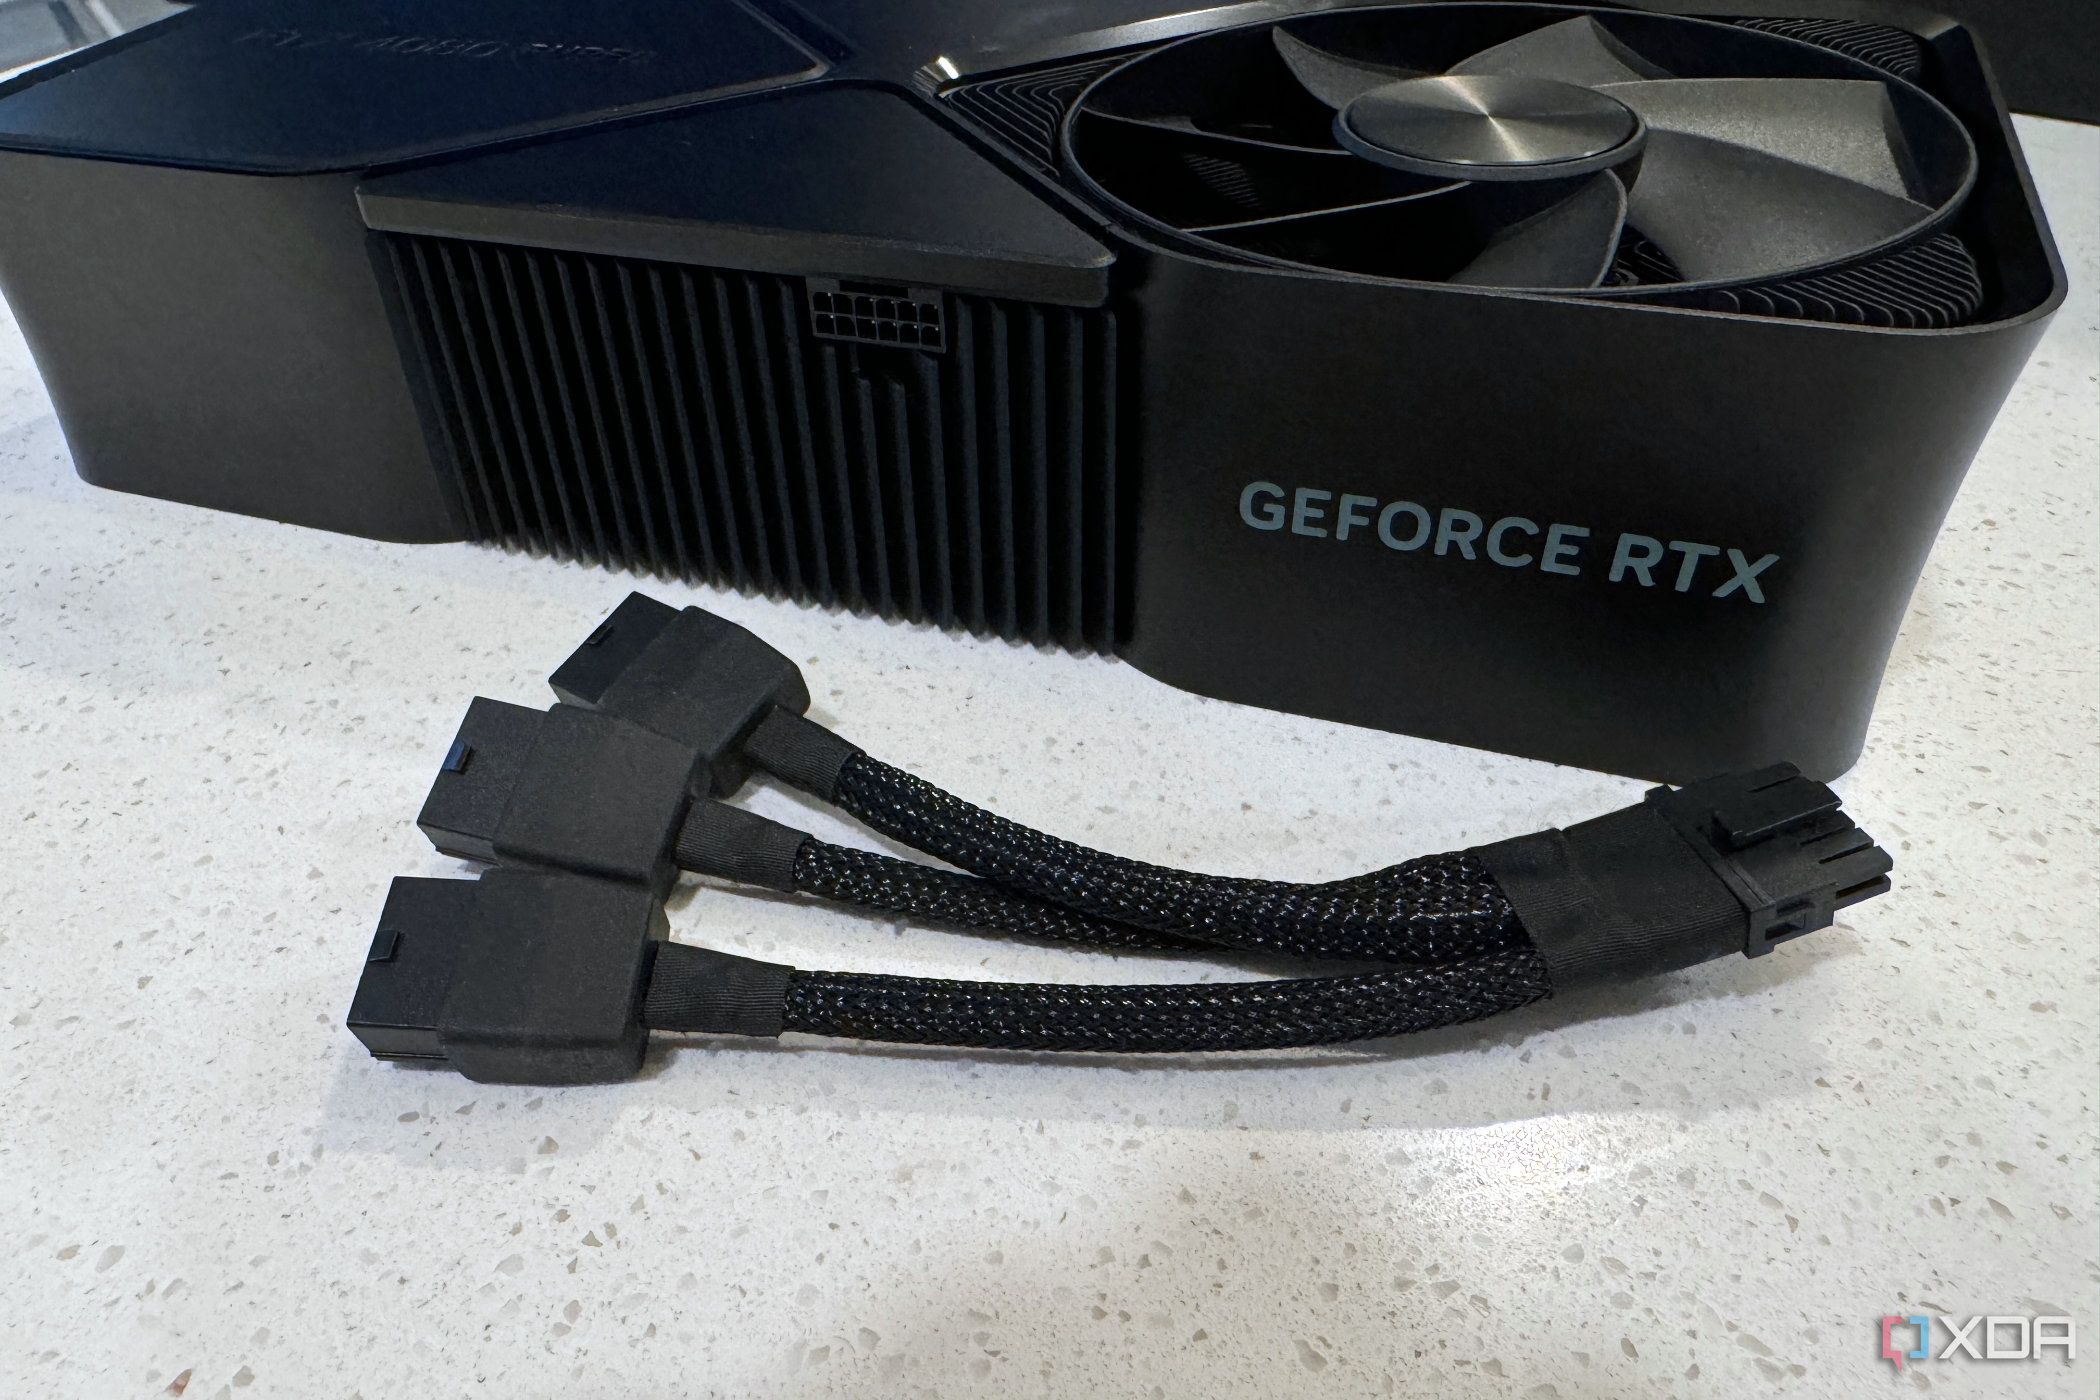 nvidia-geforce-rtx-4080-super-fe-with-power-adapter.jpg